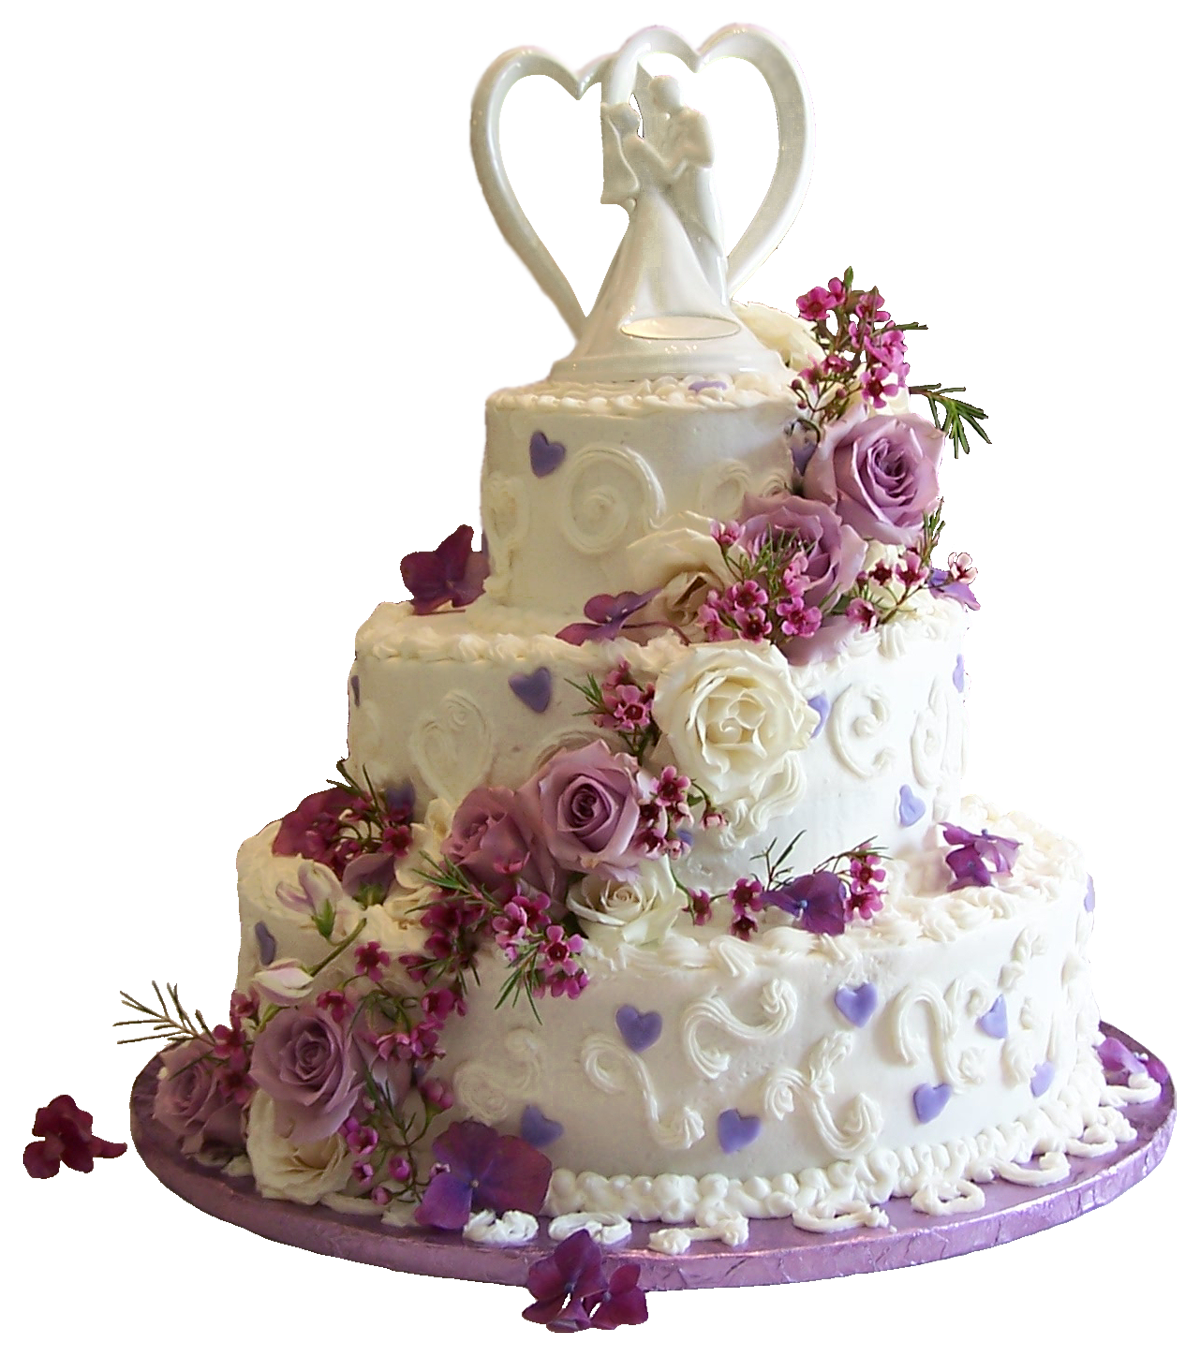 White wedding cake with. Desserts clipart road